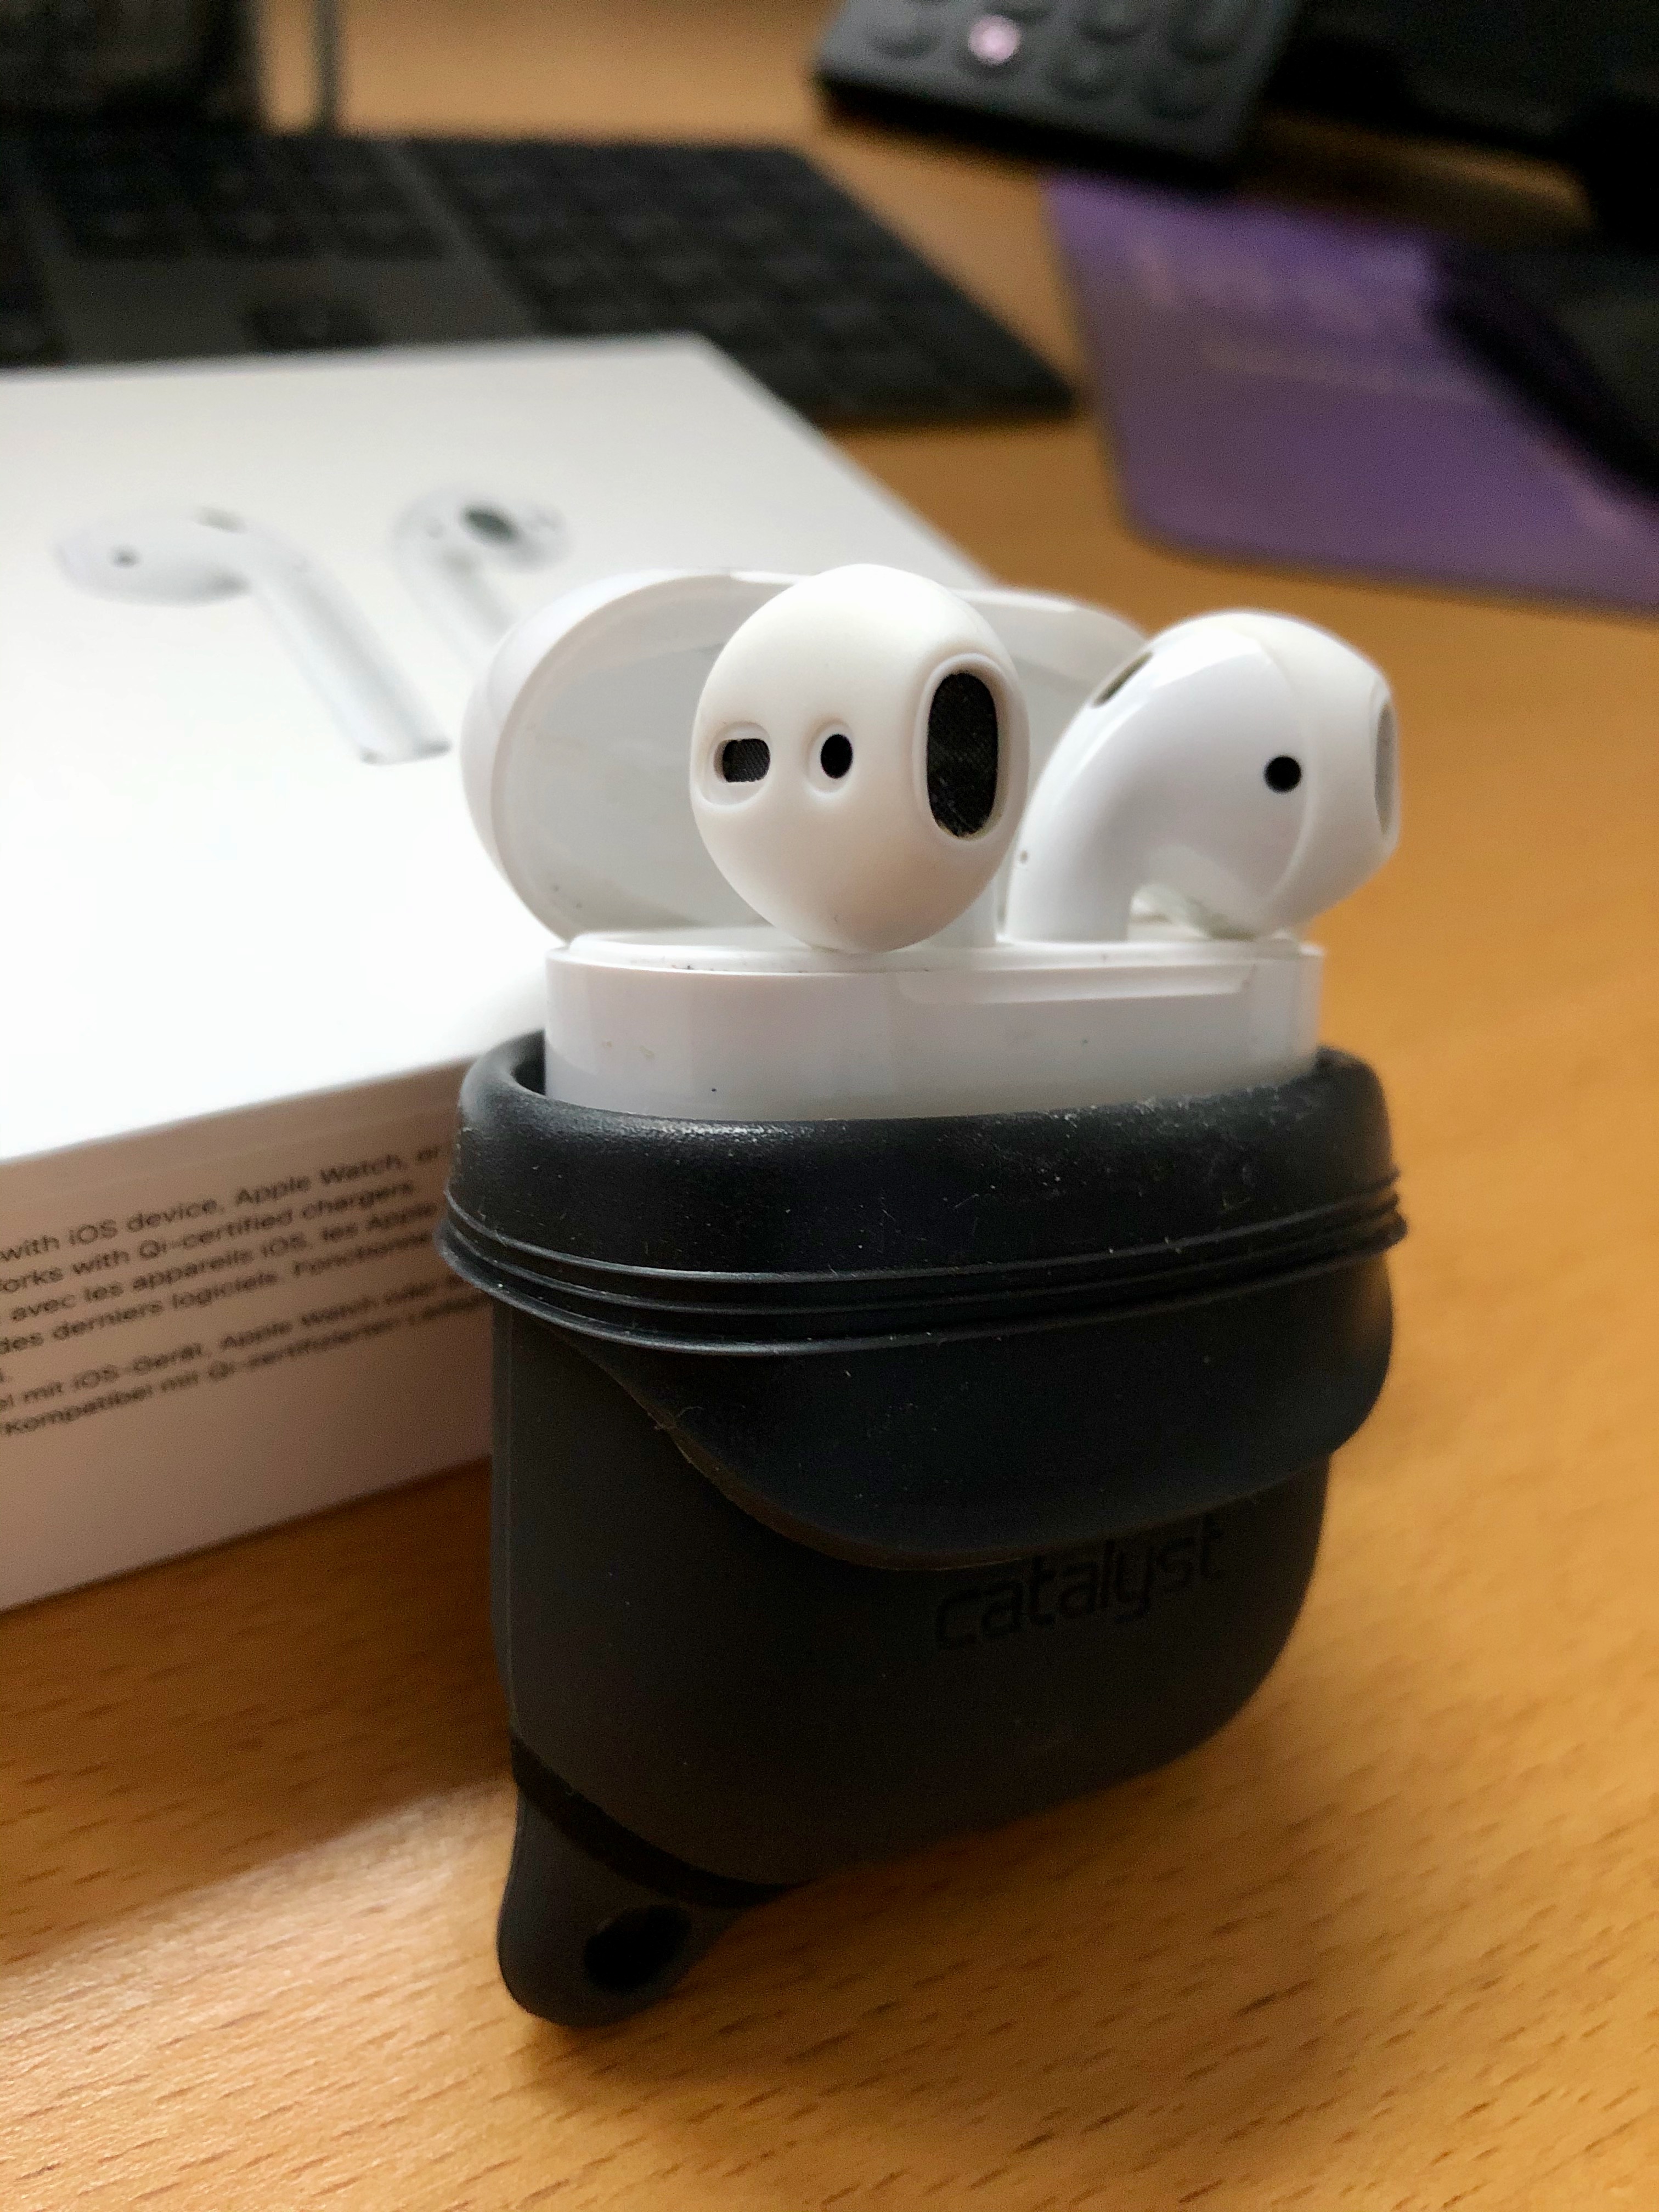 Apple AirPods 2 with Tips